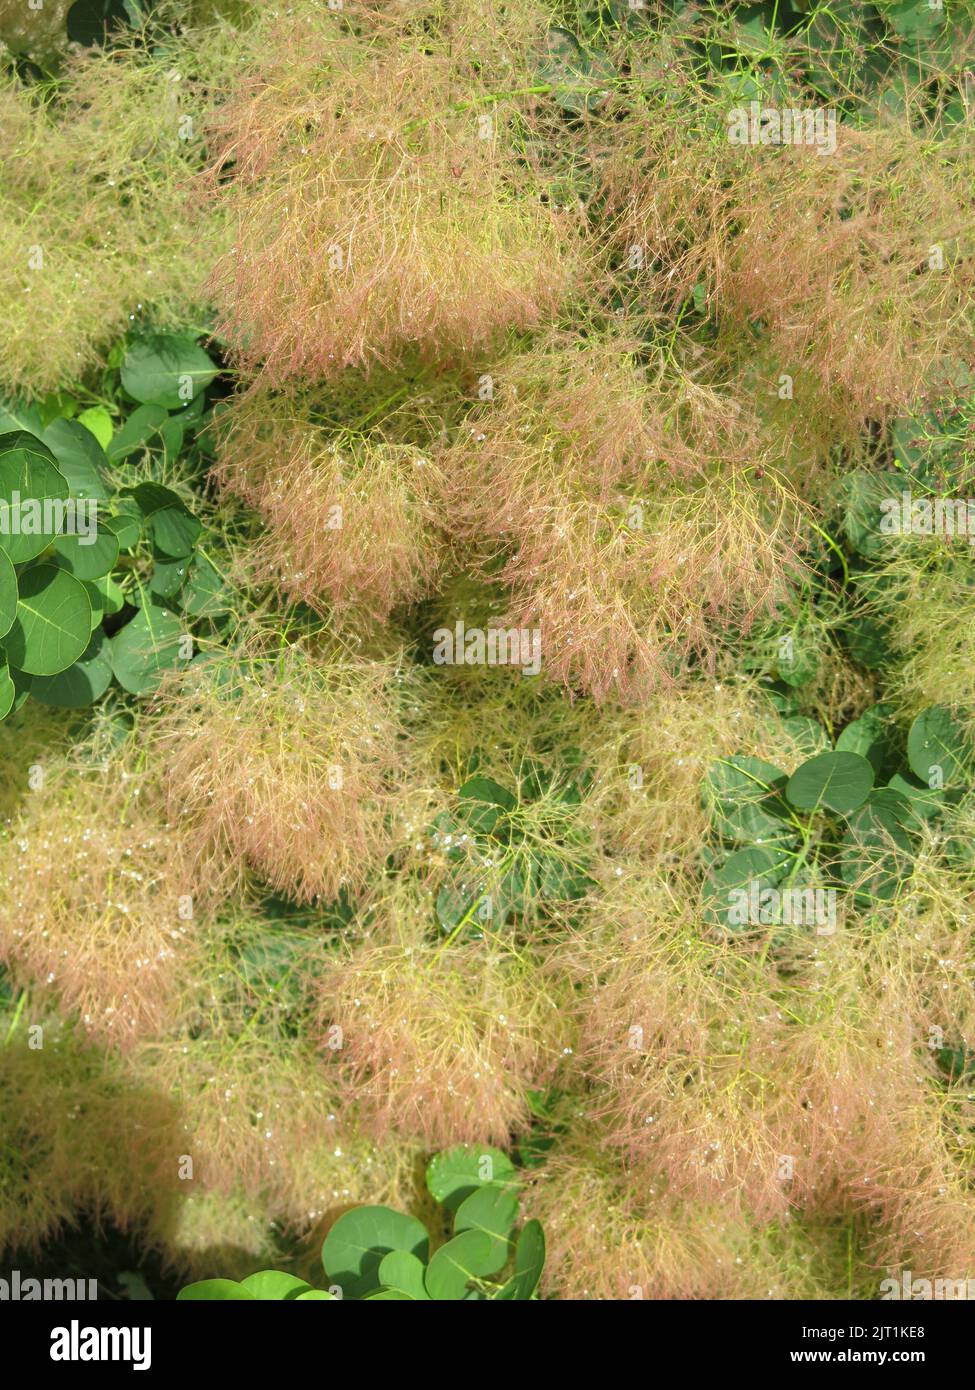 With its characteristic cloudy haze of flowering panicles, the cotinus plant is commonly known as smoke bush or smoketree making an attractive shrub. Stock Photo